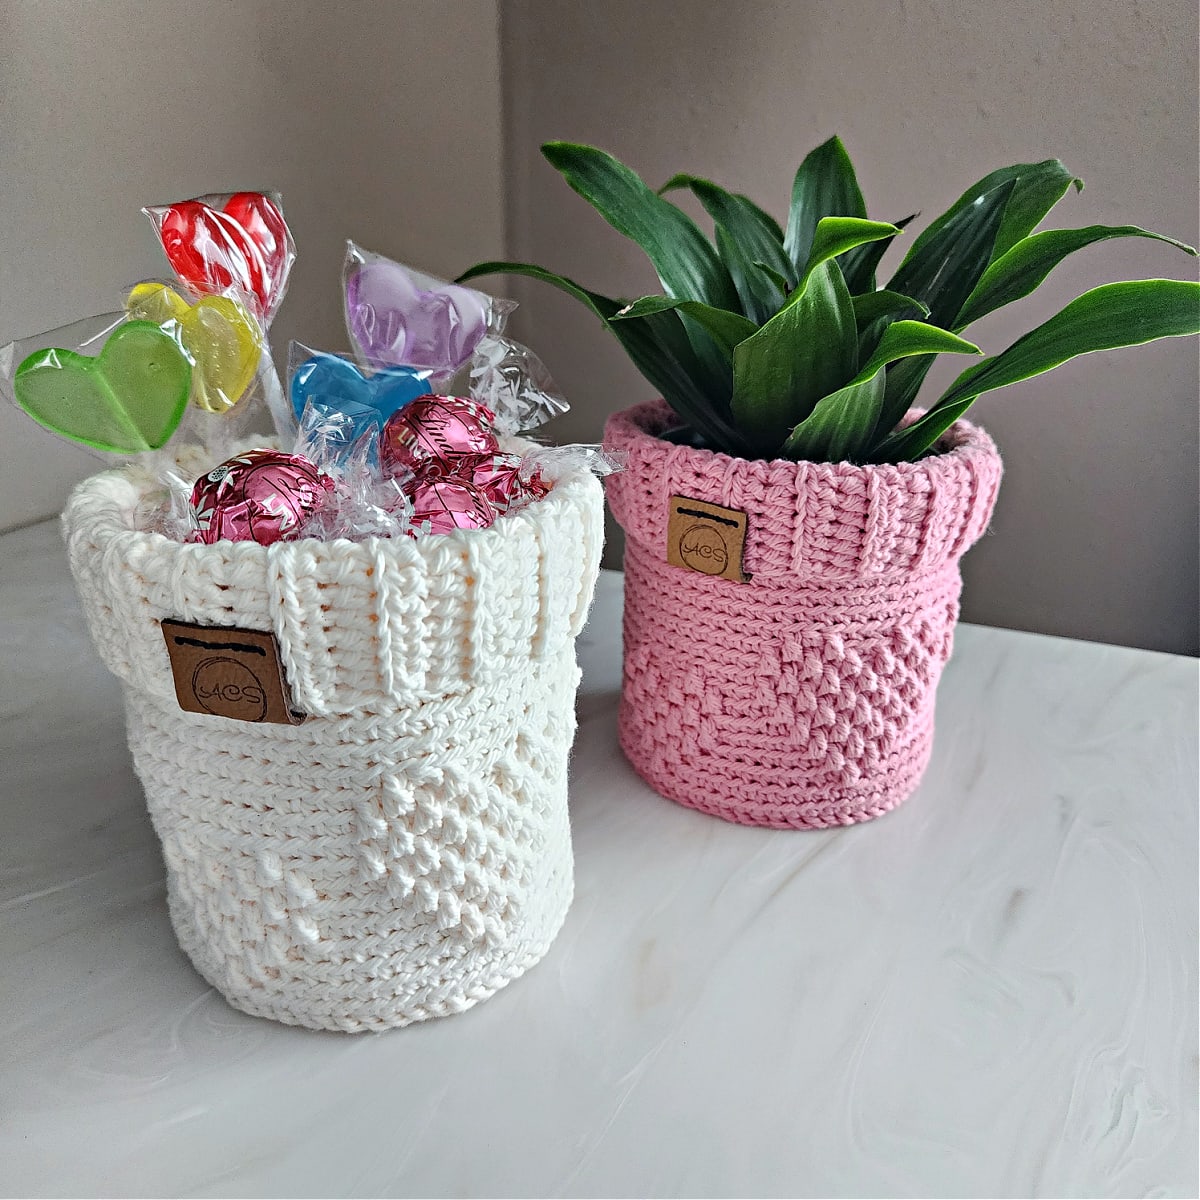 Pink crochet plant pot cover with an indoor house plant and cream color crochet candy dish filled with candy.